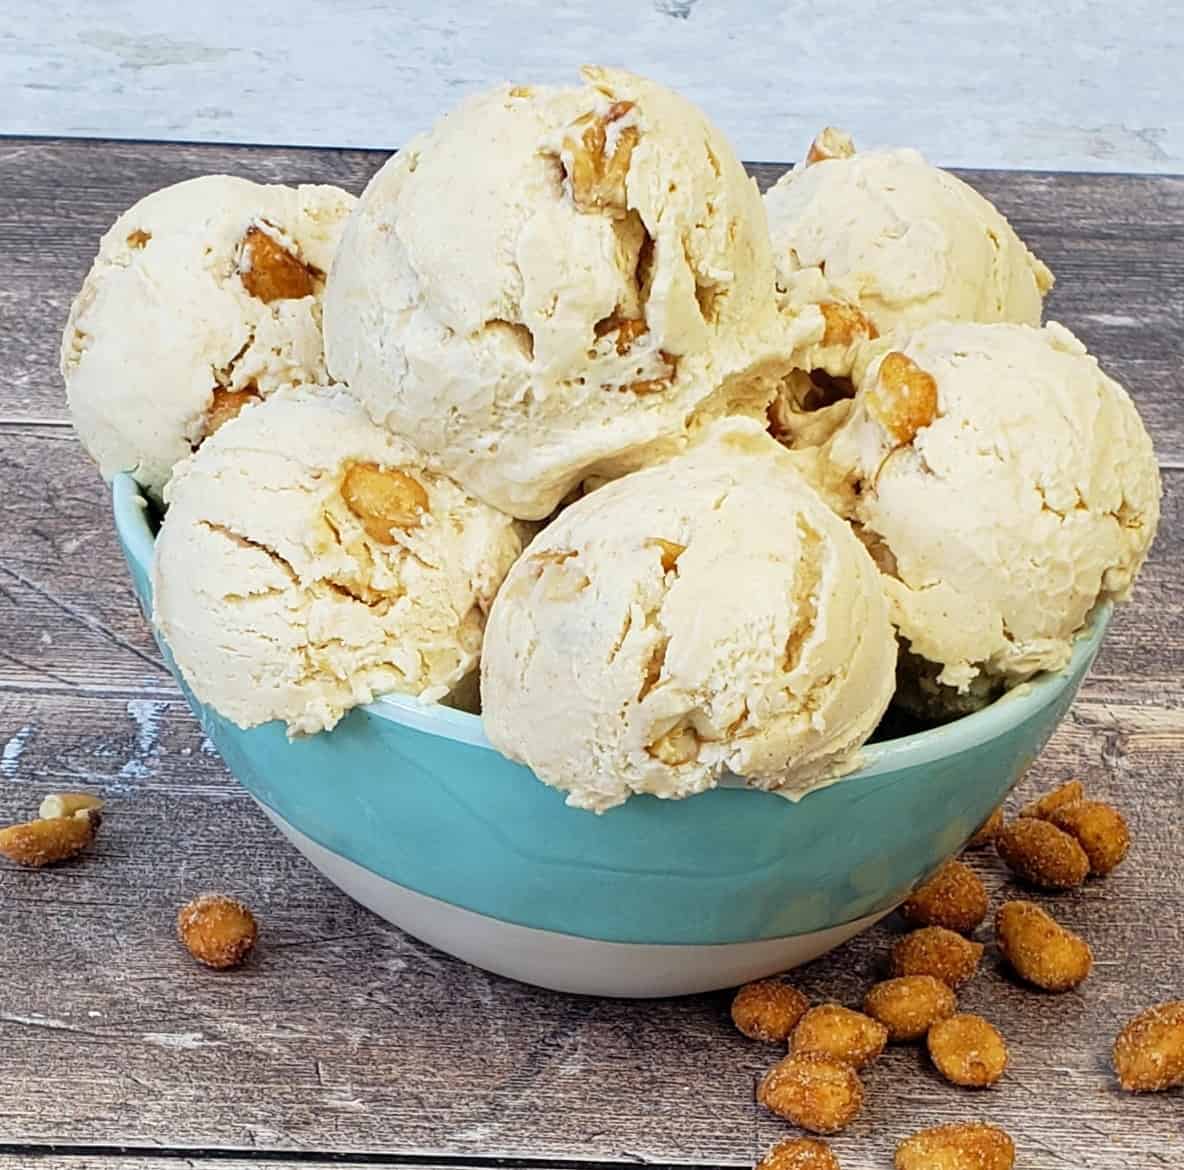 Bowl of scoops of peanut butter ice cream with peanuts on wooden surface.